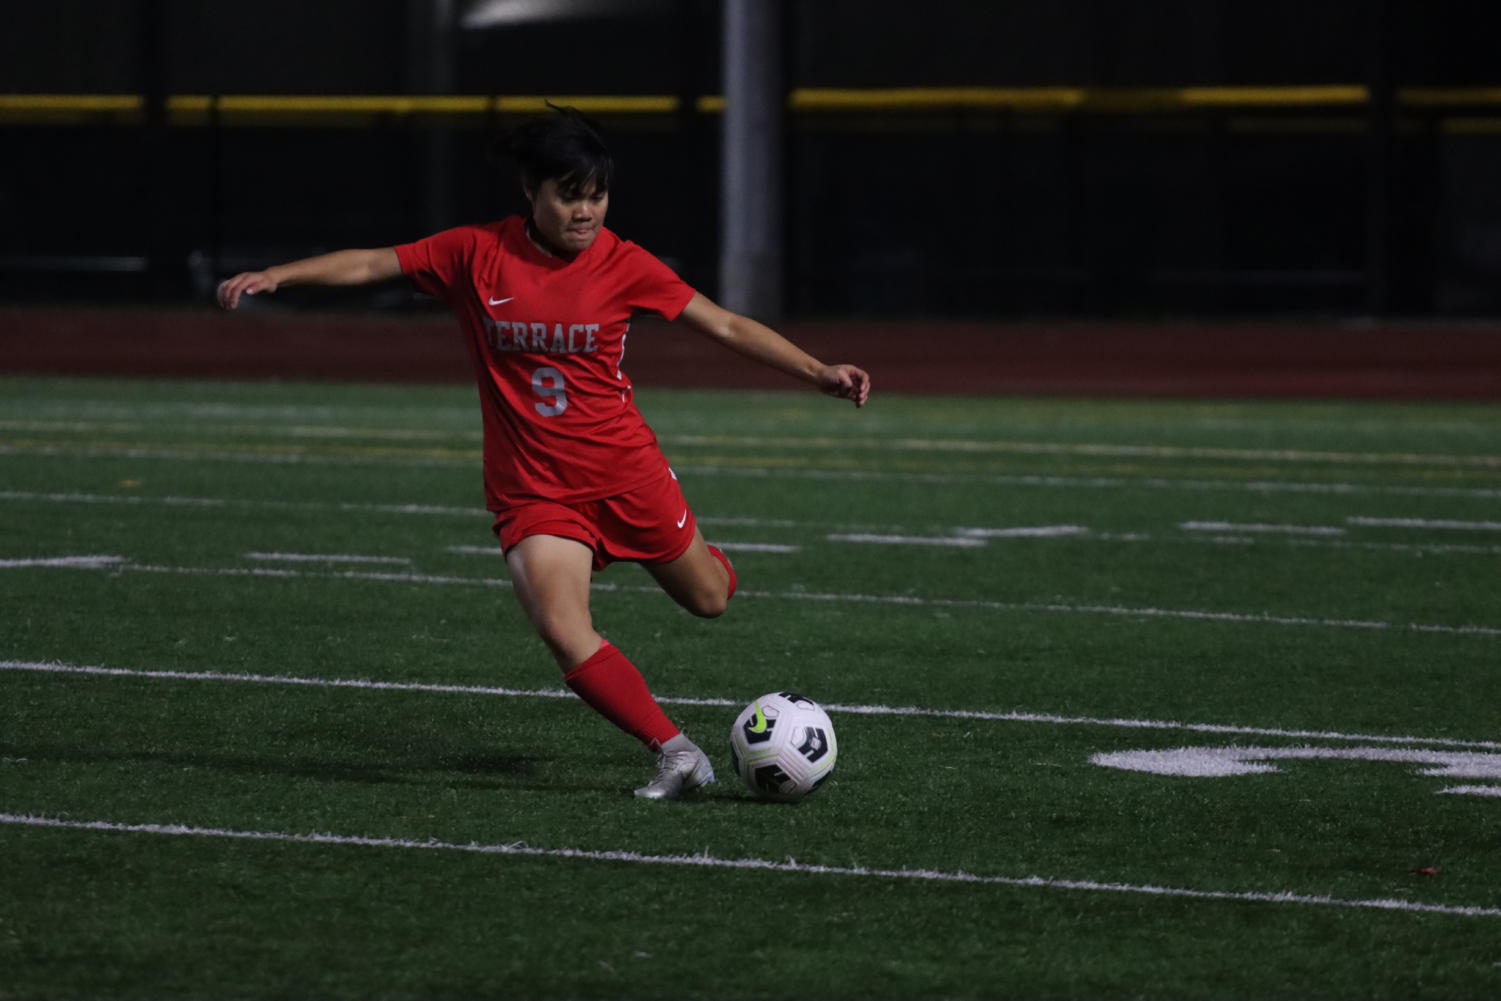 Junior Daniela Cortezzo on the field in a soccer game. Shes just about to kick the ball, with her leg lifted ready to kick.